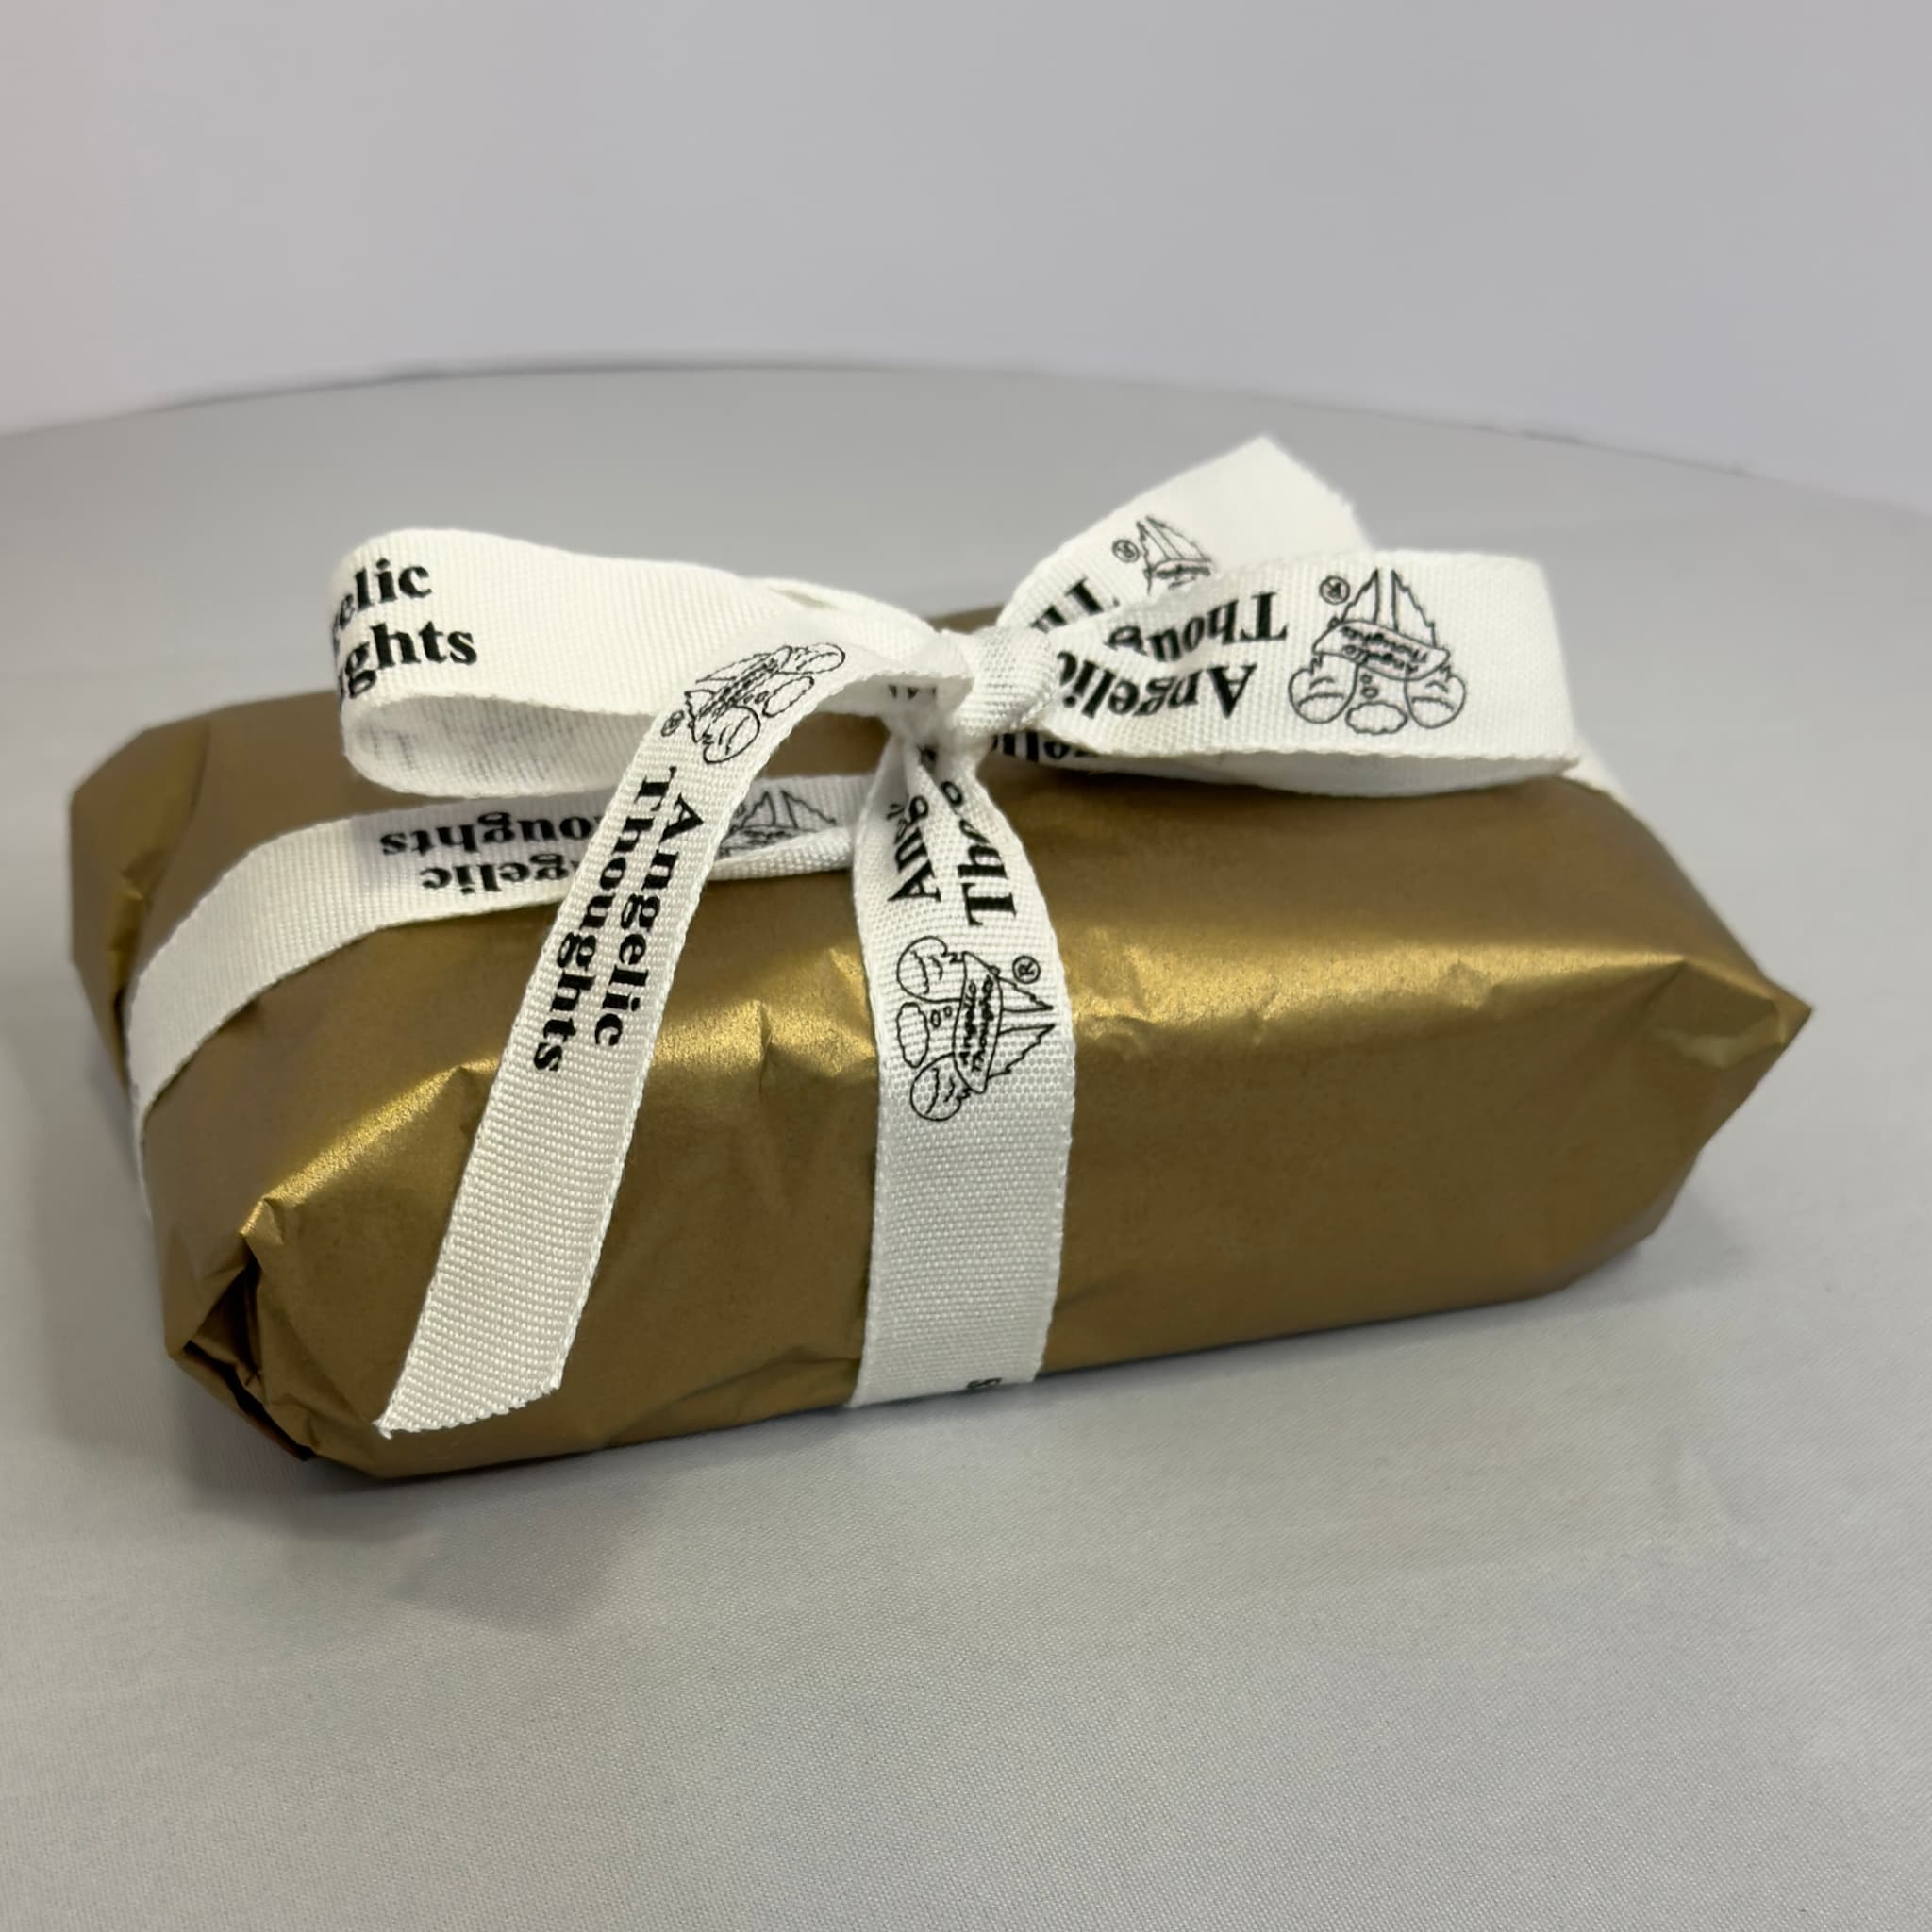 2 pack tealight wrapped in gold tissue paper and tied with angelic thoughts ribbon